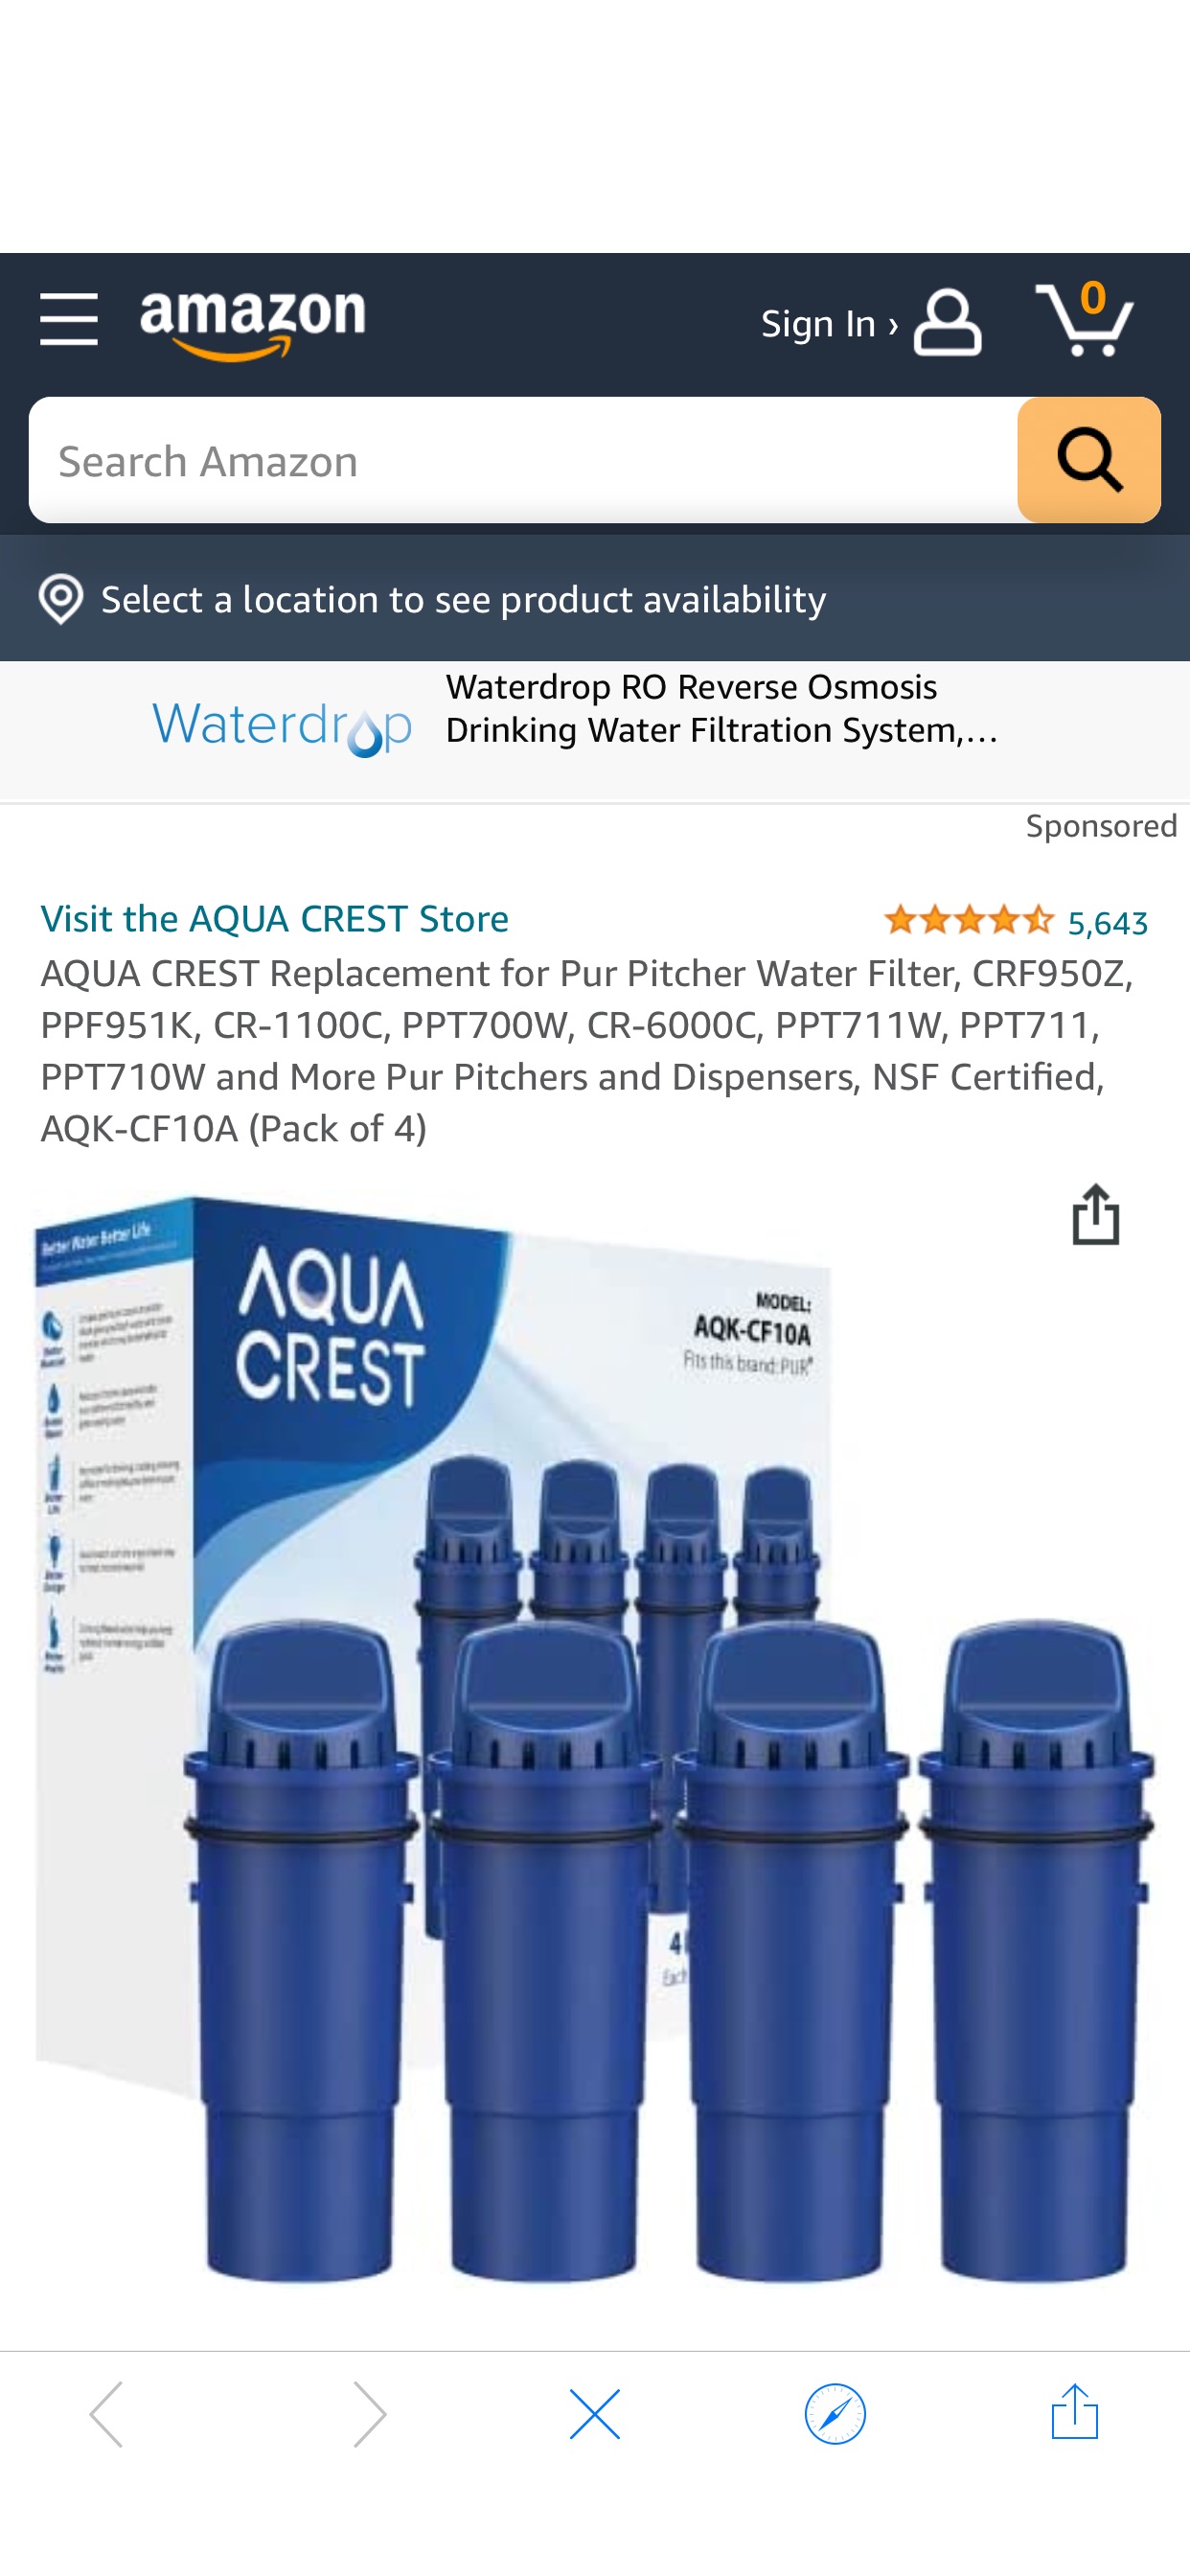 Amazon.com: AQUA CREST Replacement for Pur Pitcher Water Filter